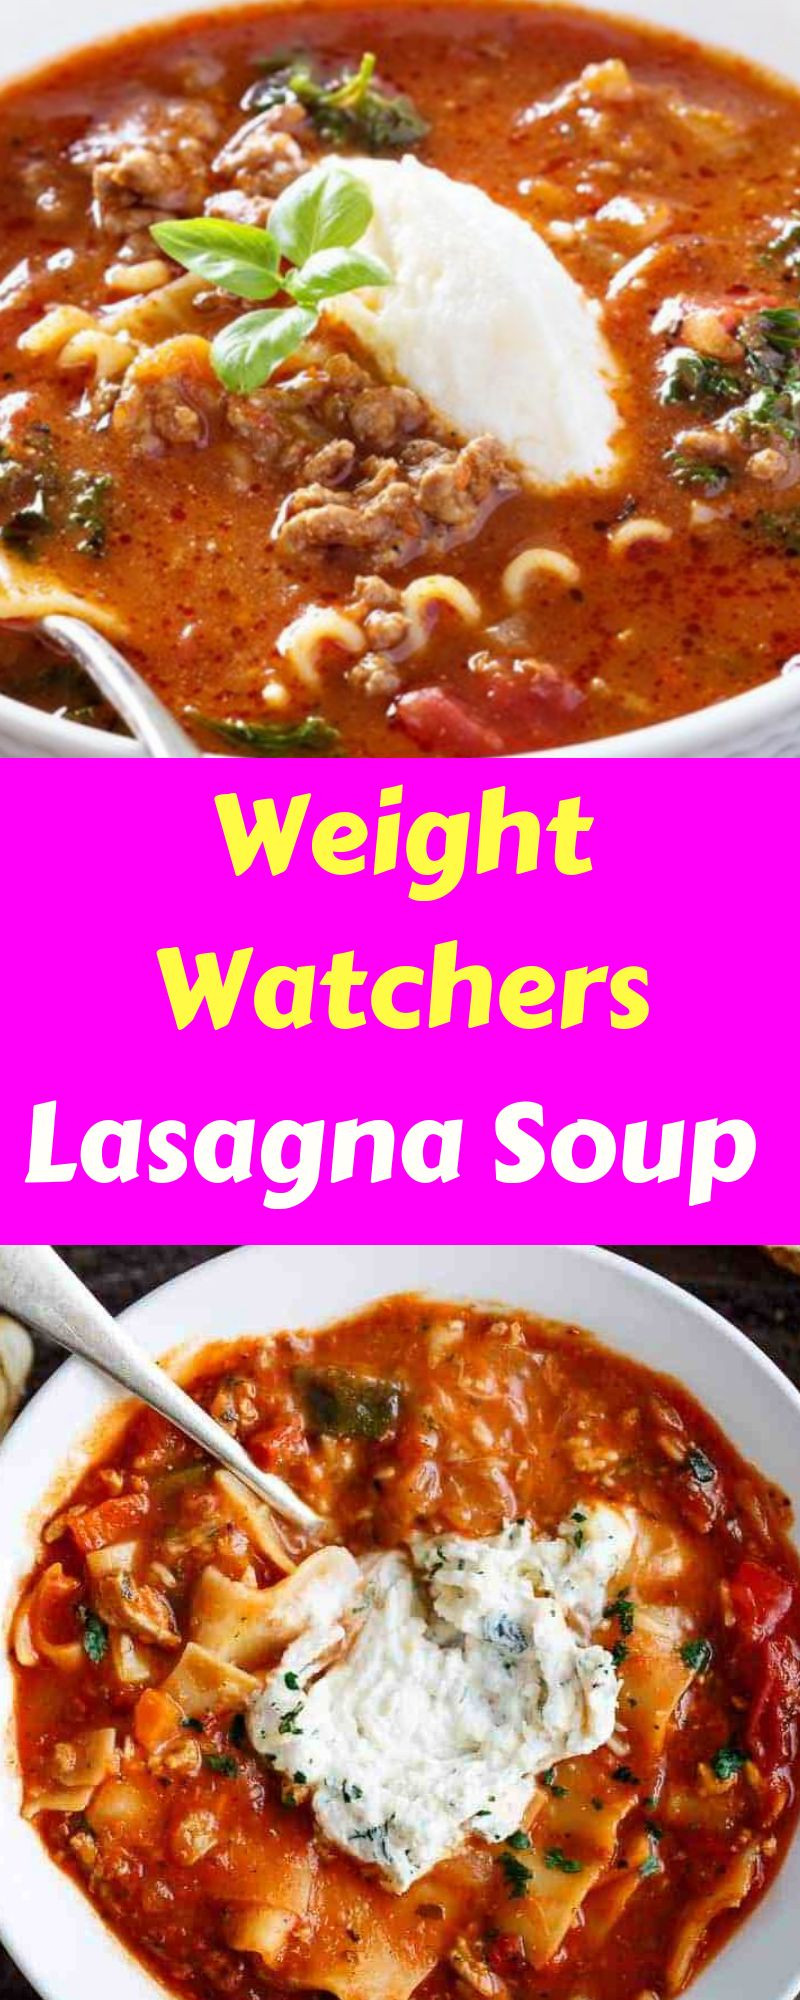 Weight Watchers Lasagna Soup
 Pin on Food WW